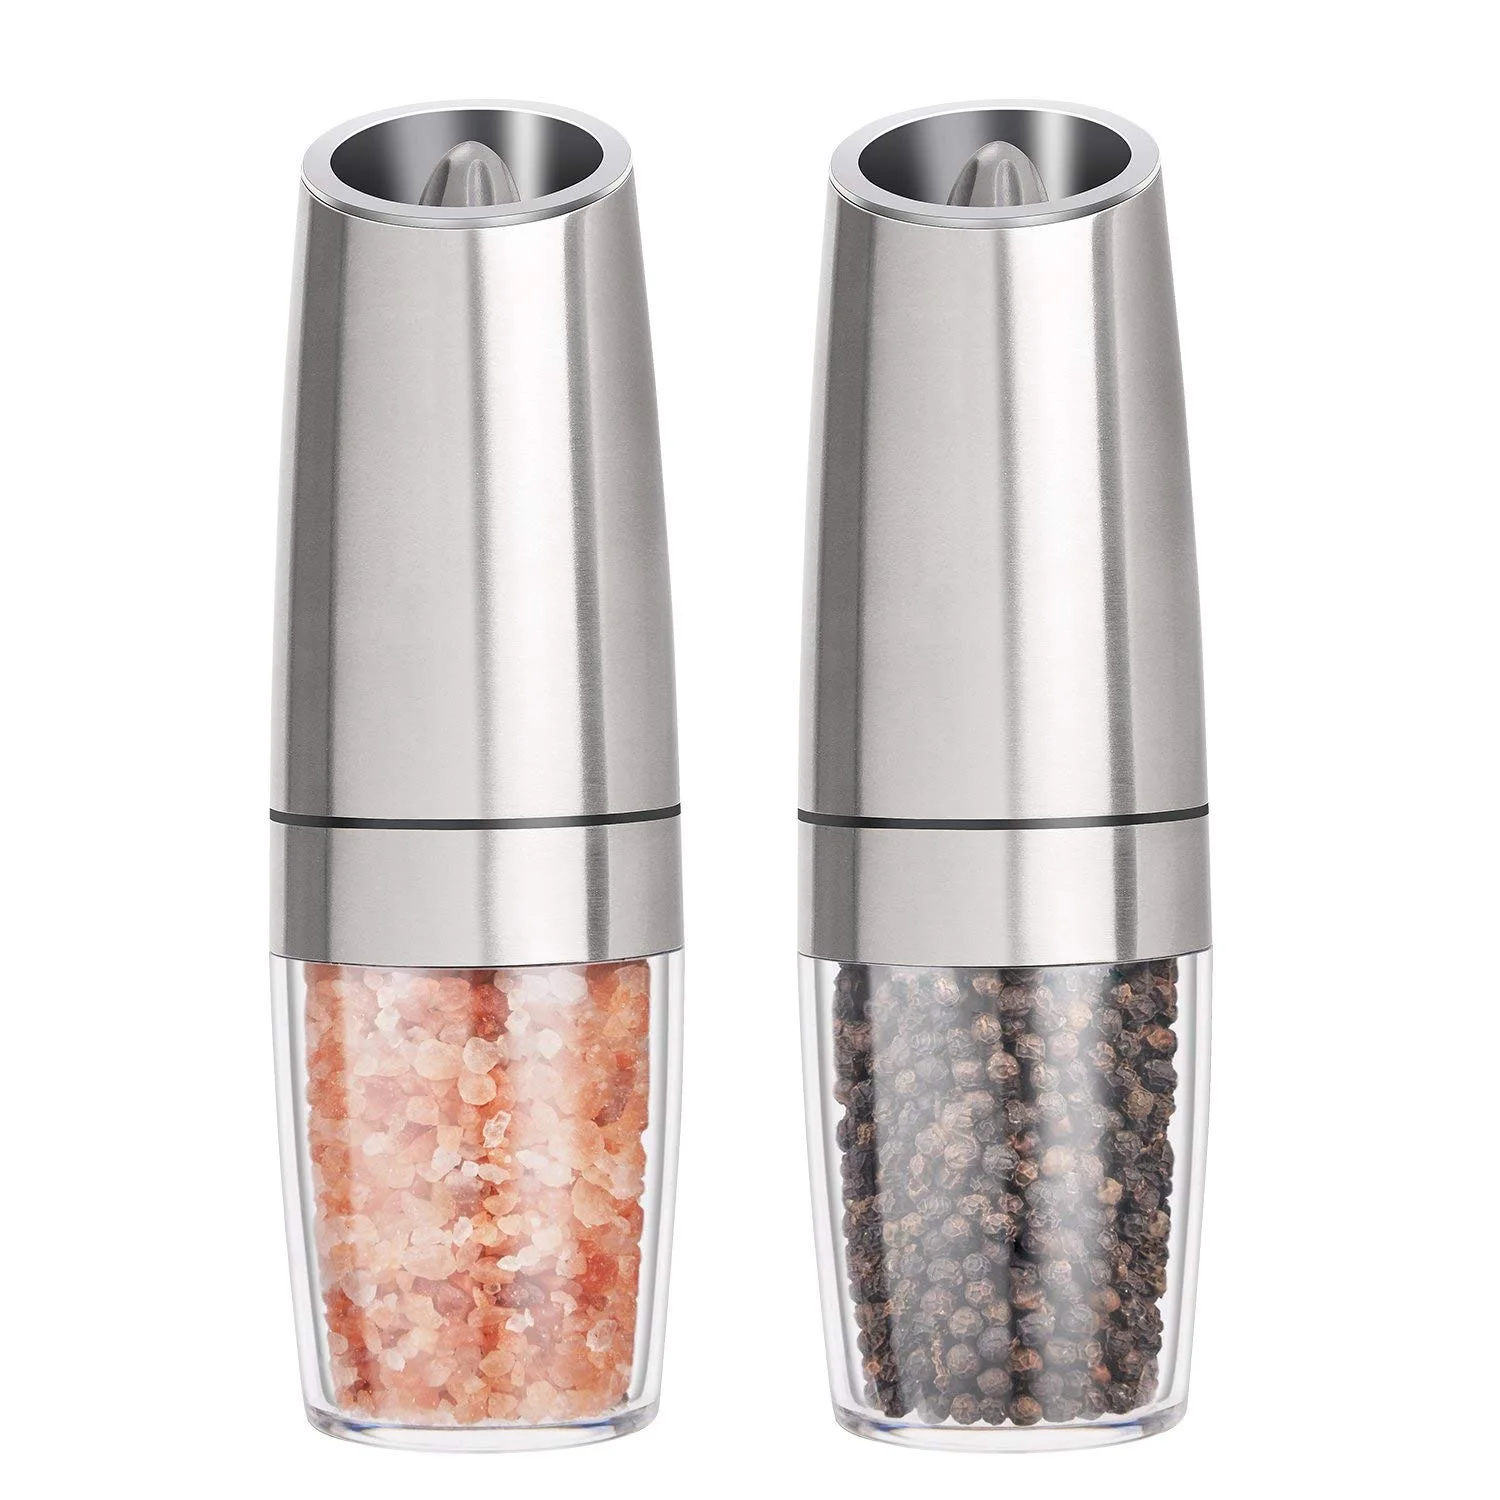 

Hot Sale Gravity Electric Salt And Pepper Grinders Set - Battery Operated, Stainless Steel Automatic Pepper Mills With Blue Le